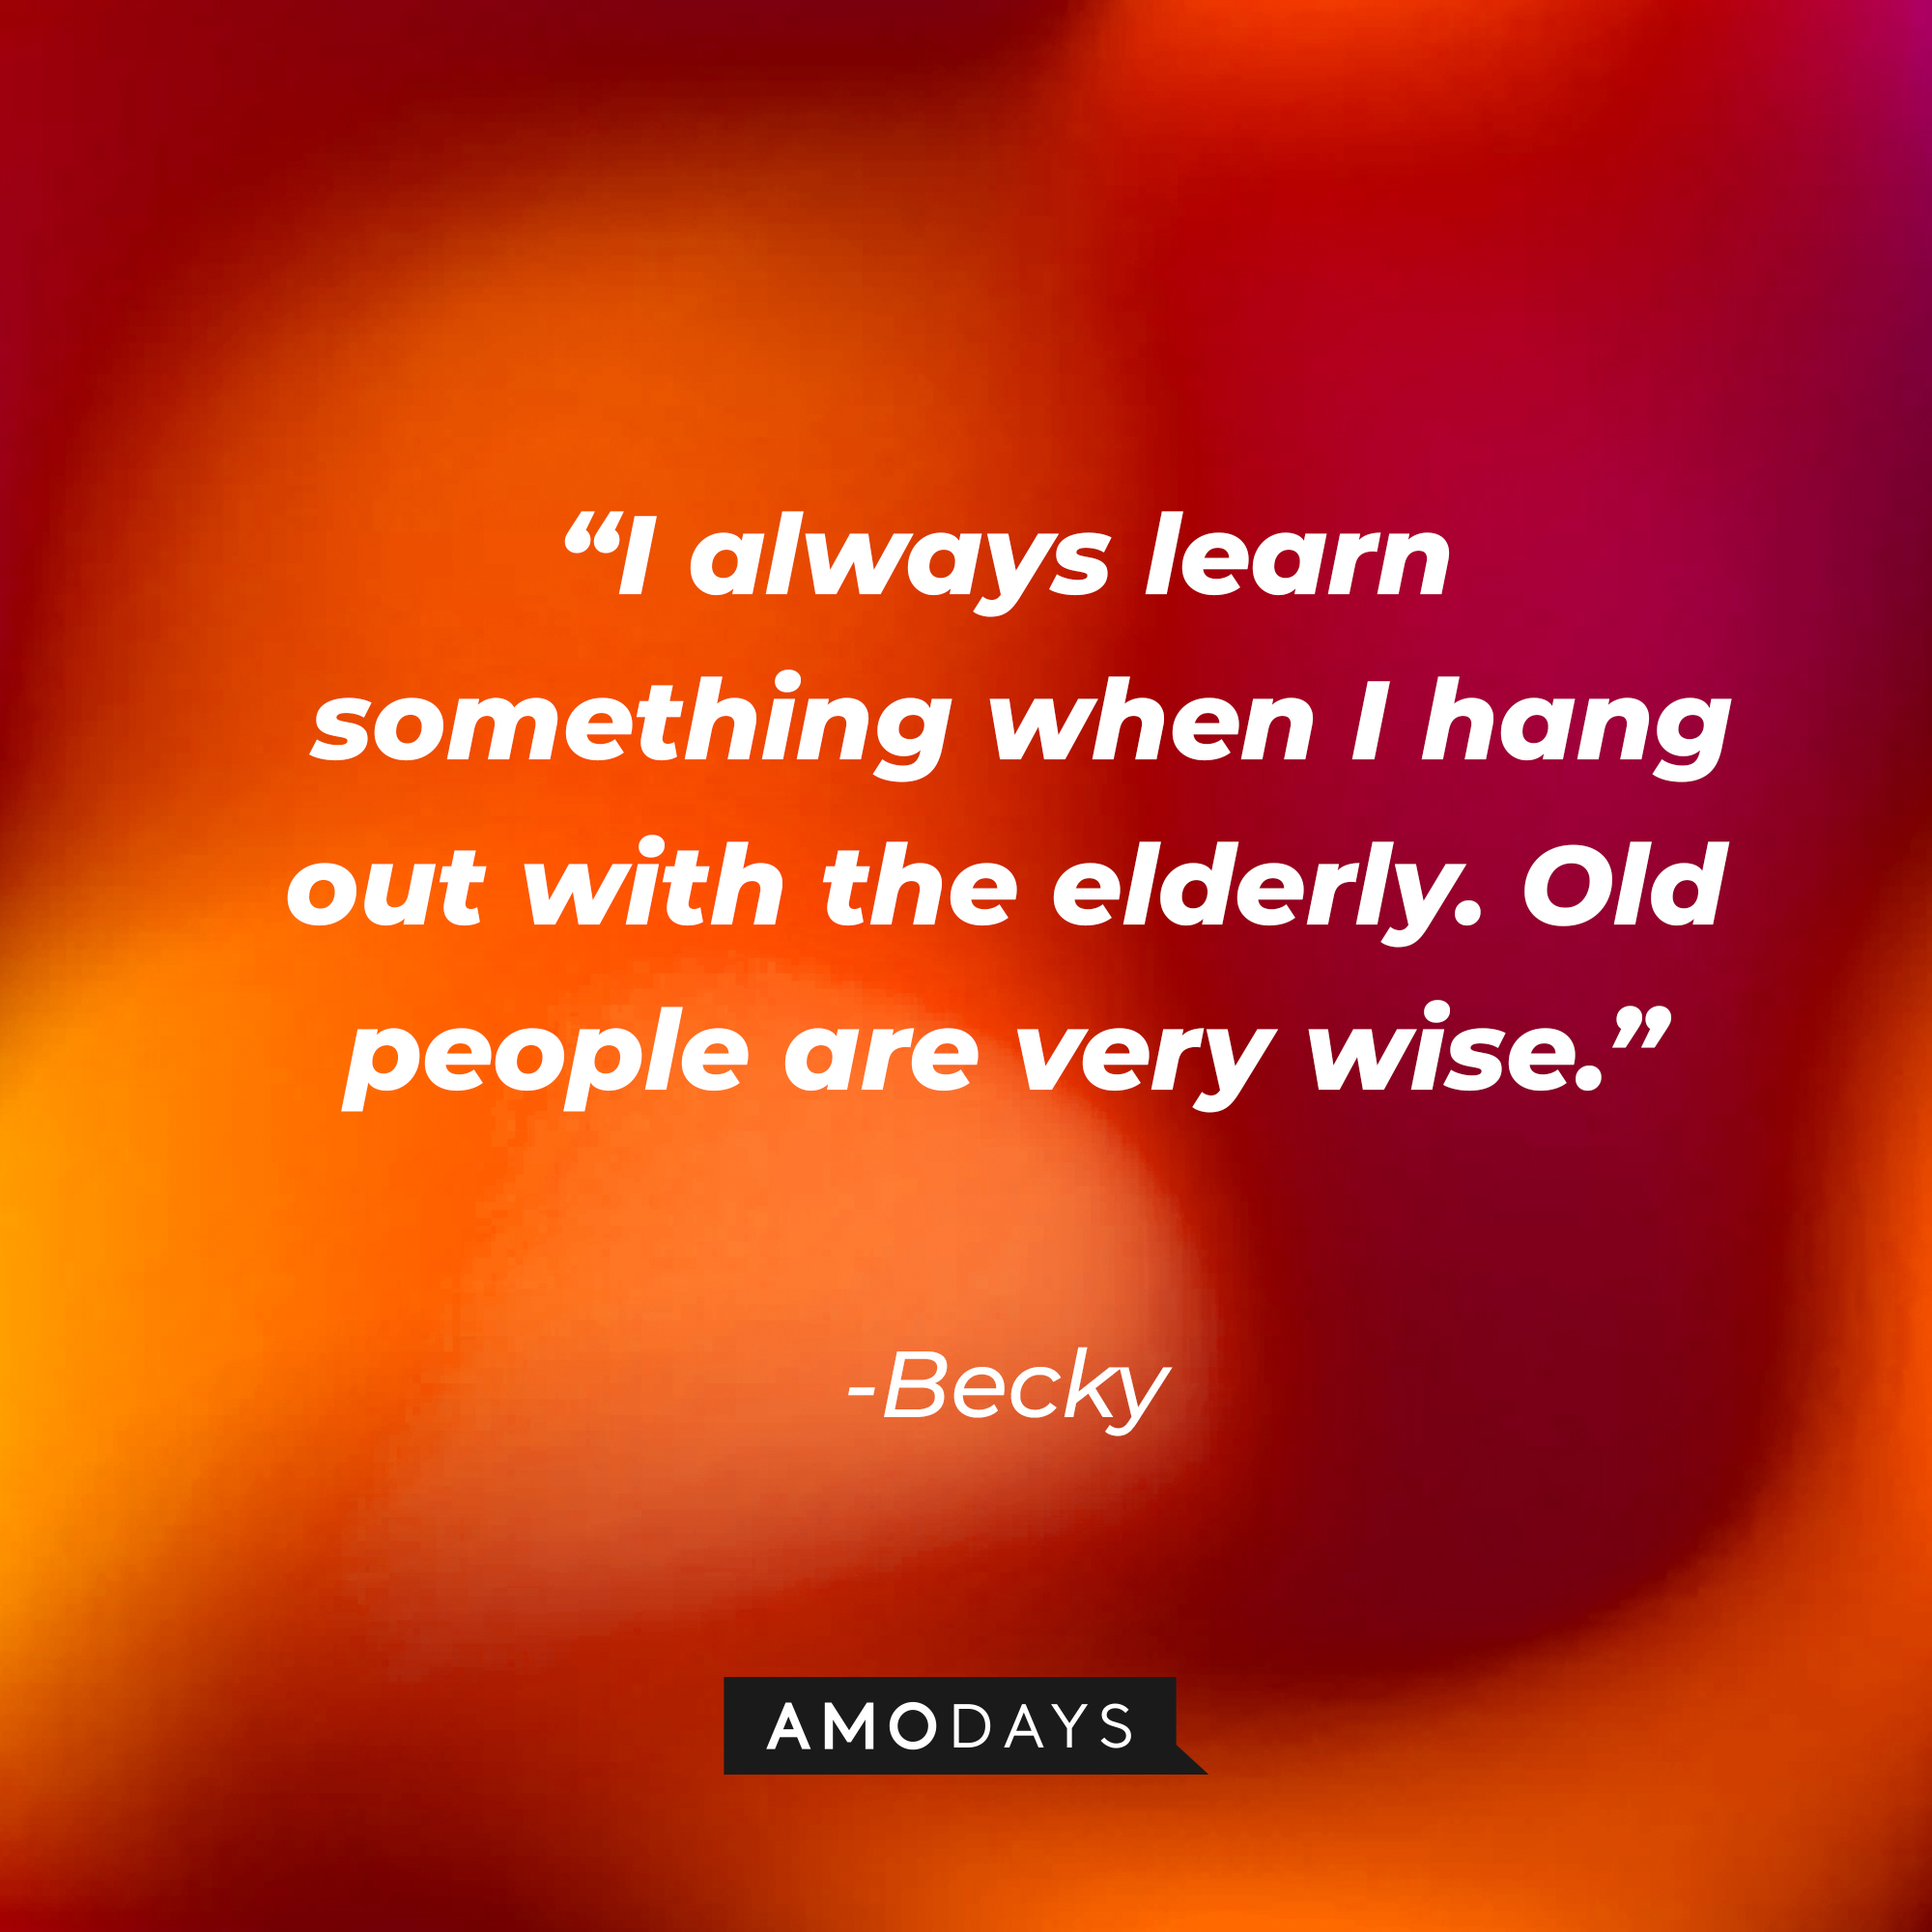 Becky’s quote “I always learn something when I hang out with the elderly. Old people are very wise.”  | Source: AmoDays